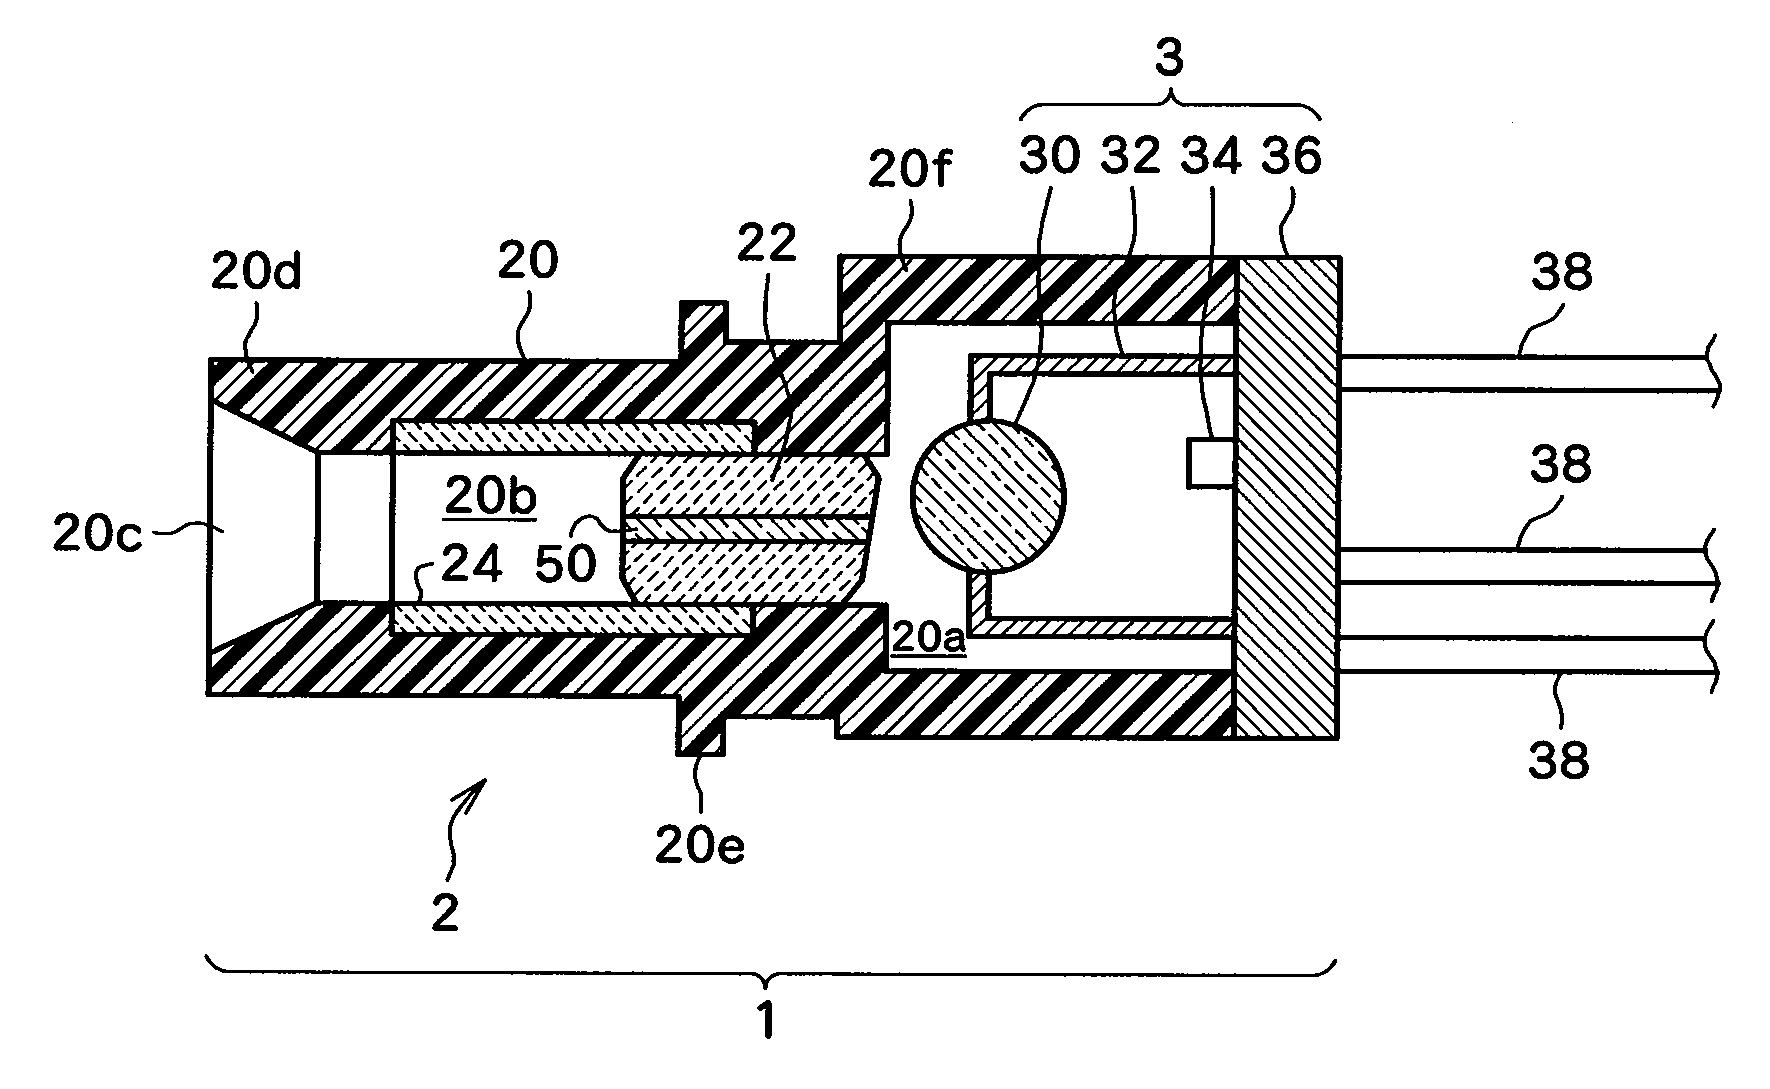 Optical receptacle, optical module, and method of manufacturing an optical module